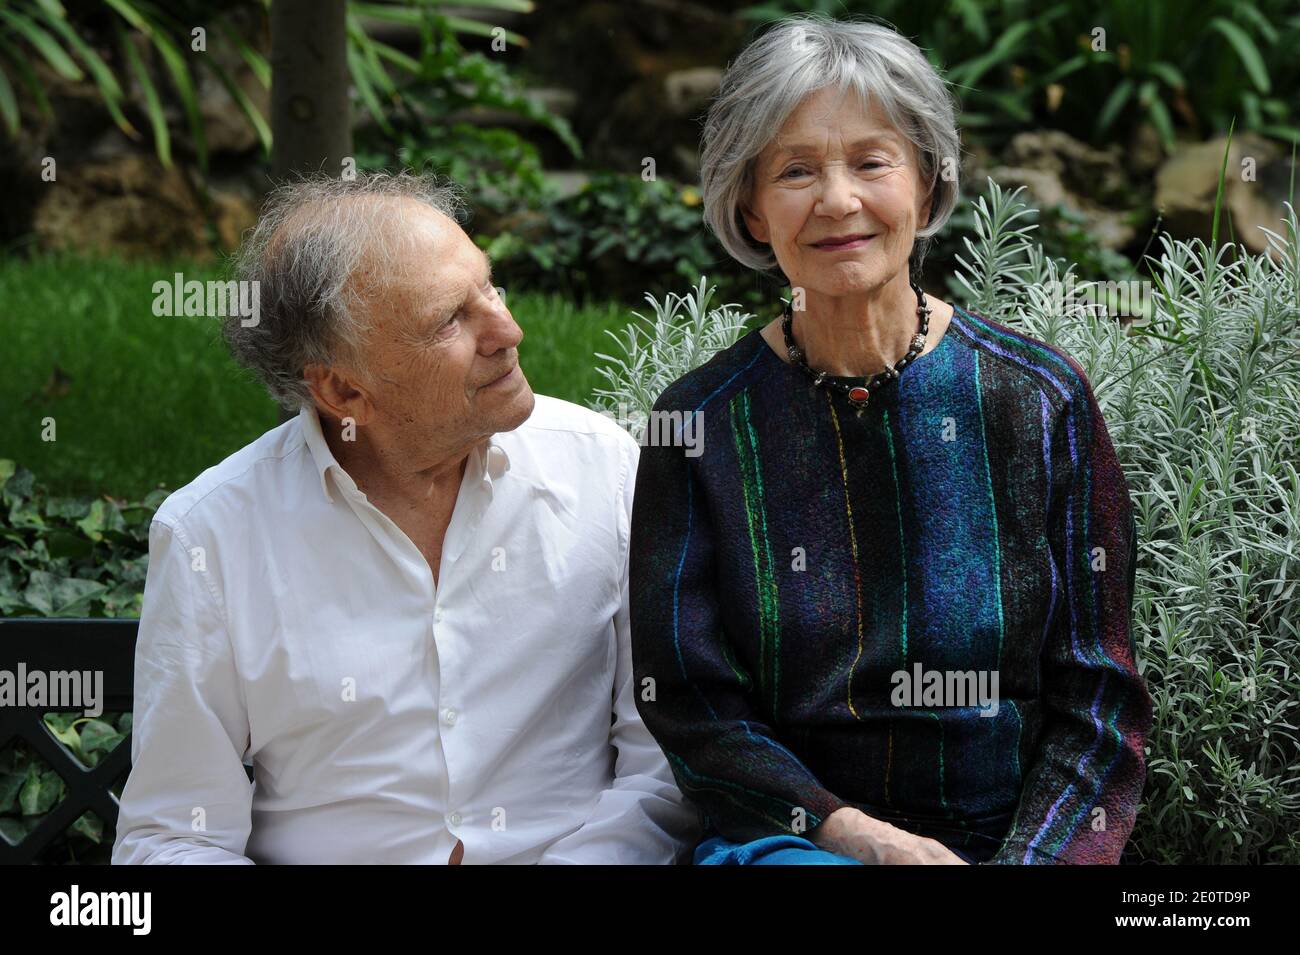 French actor Jean-Louis Trintignant and French actress Emmanuelle Riva pose  during a photocall for the presentation of the film 'Amour' on October 9,  2012 in Rome, Italy. This movie won the Palme